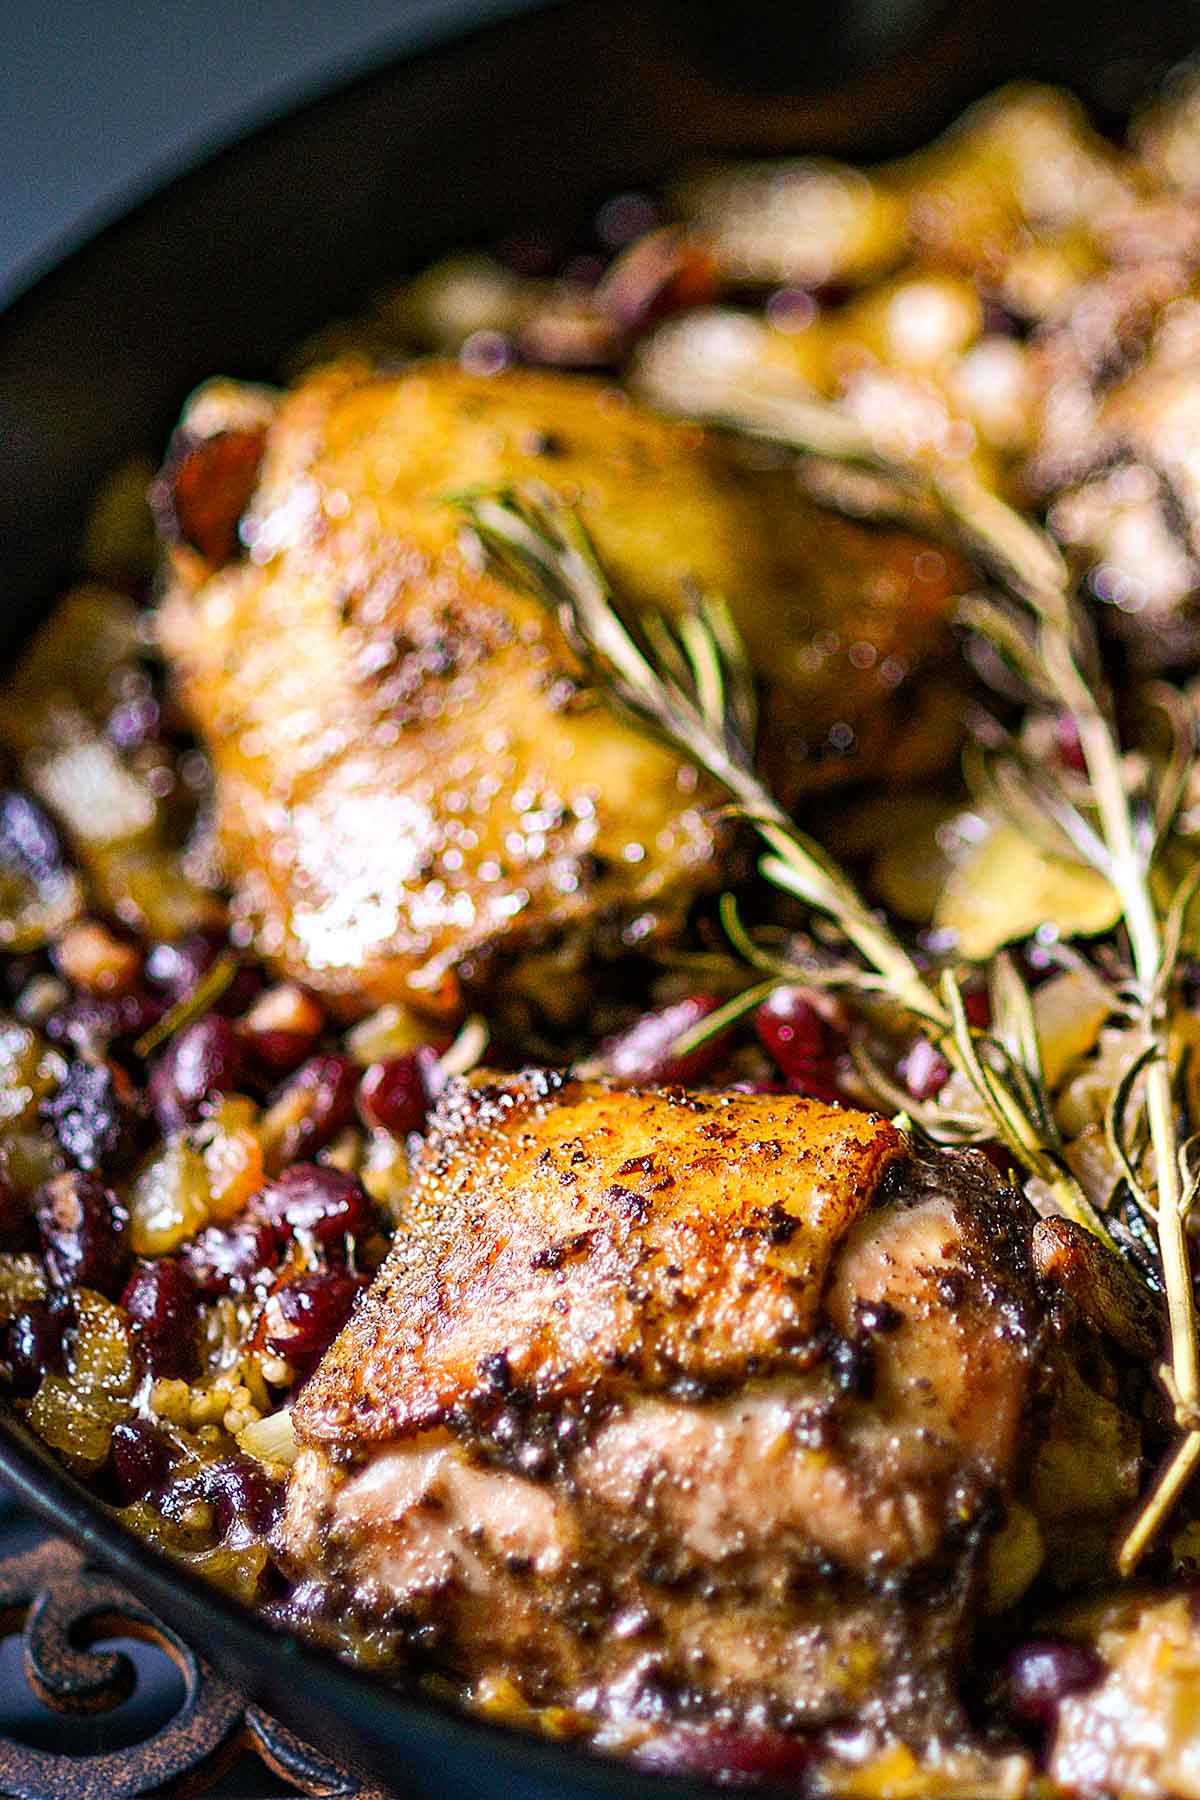 Jamaican jerk chicken thighs with red beans and coconut rice fully cooked in a cast iron skillet.